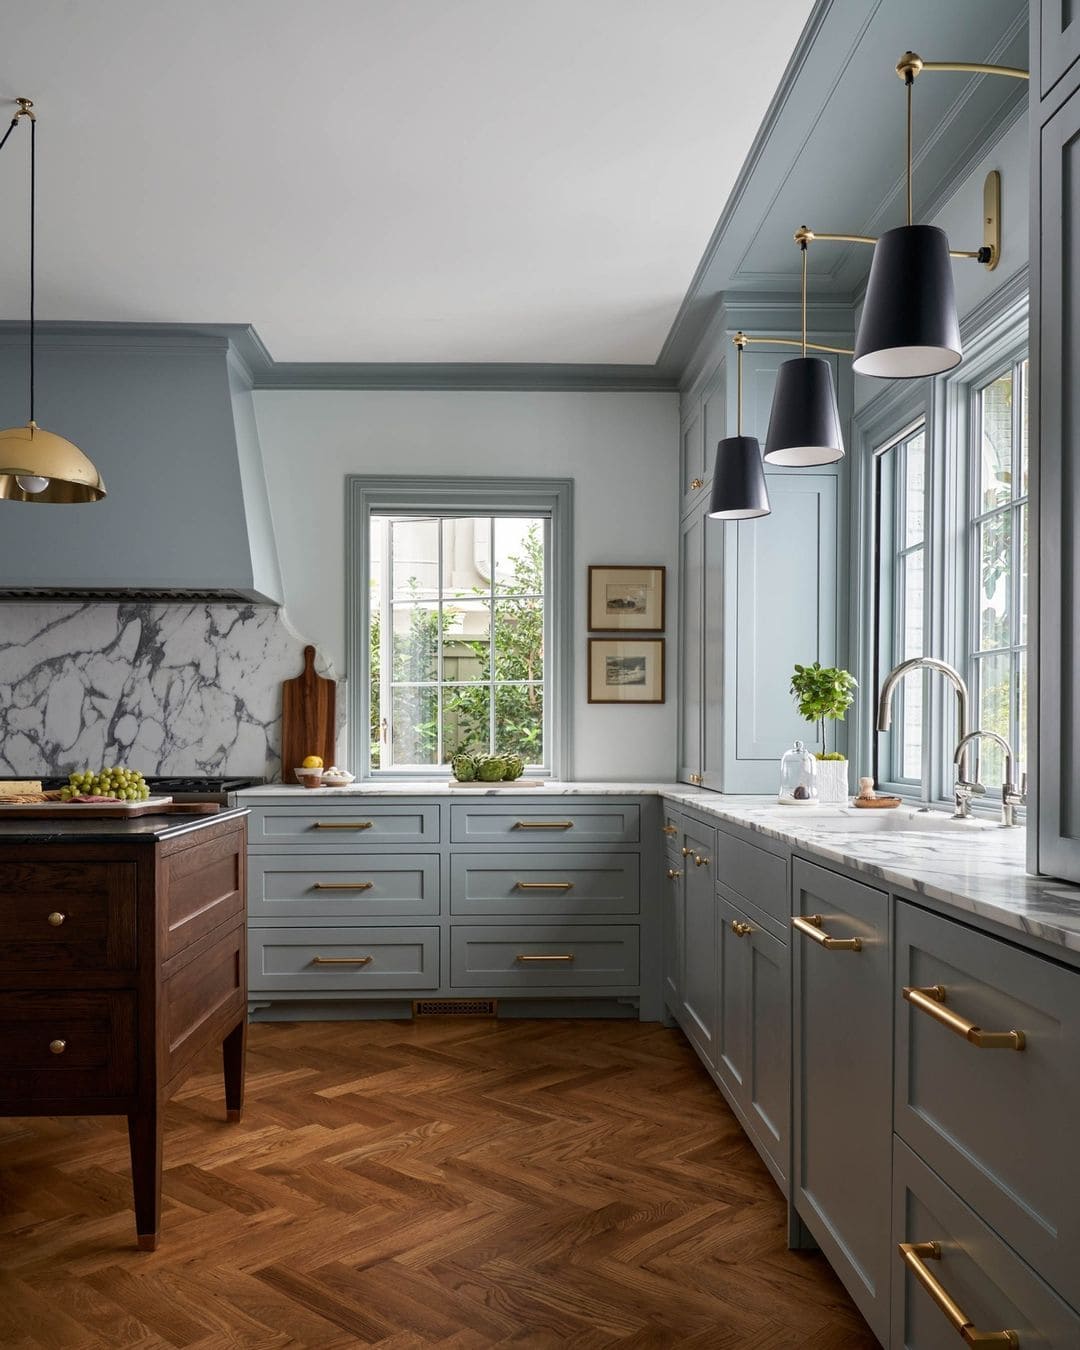 modern traditional kitchen with blue shades and wooden floors, balanced in scale and proportion